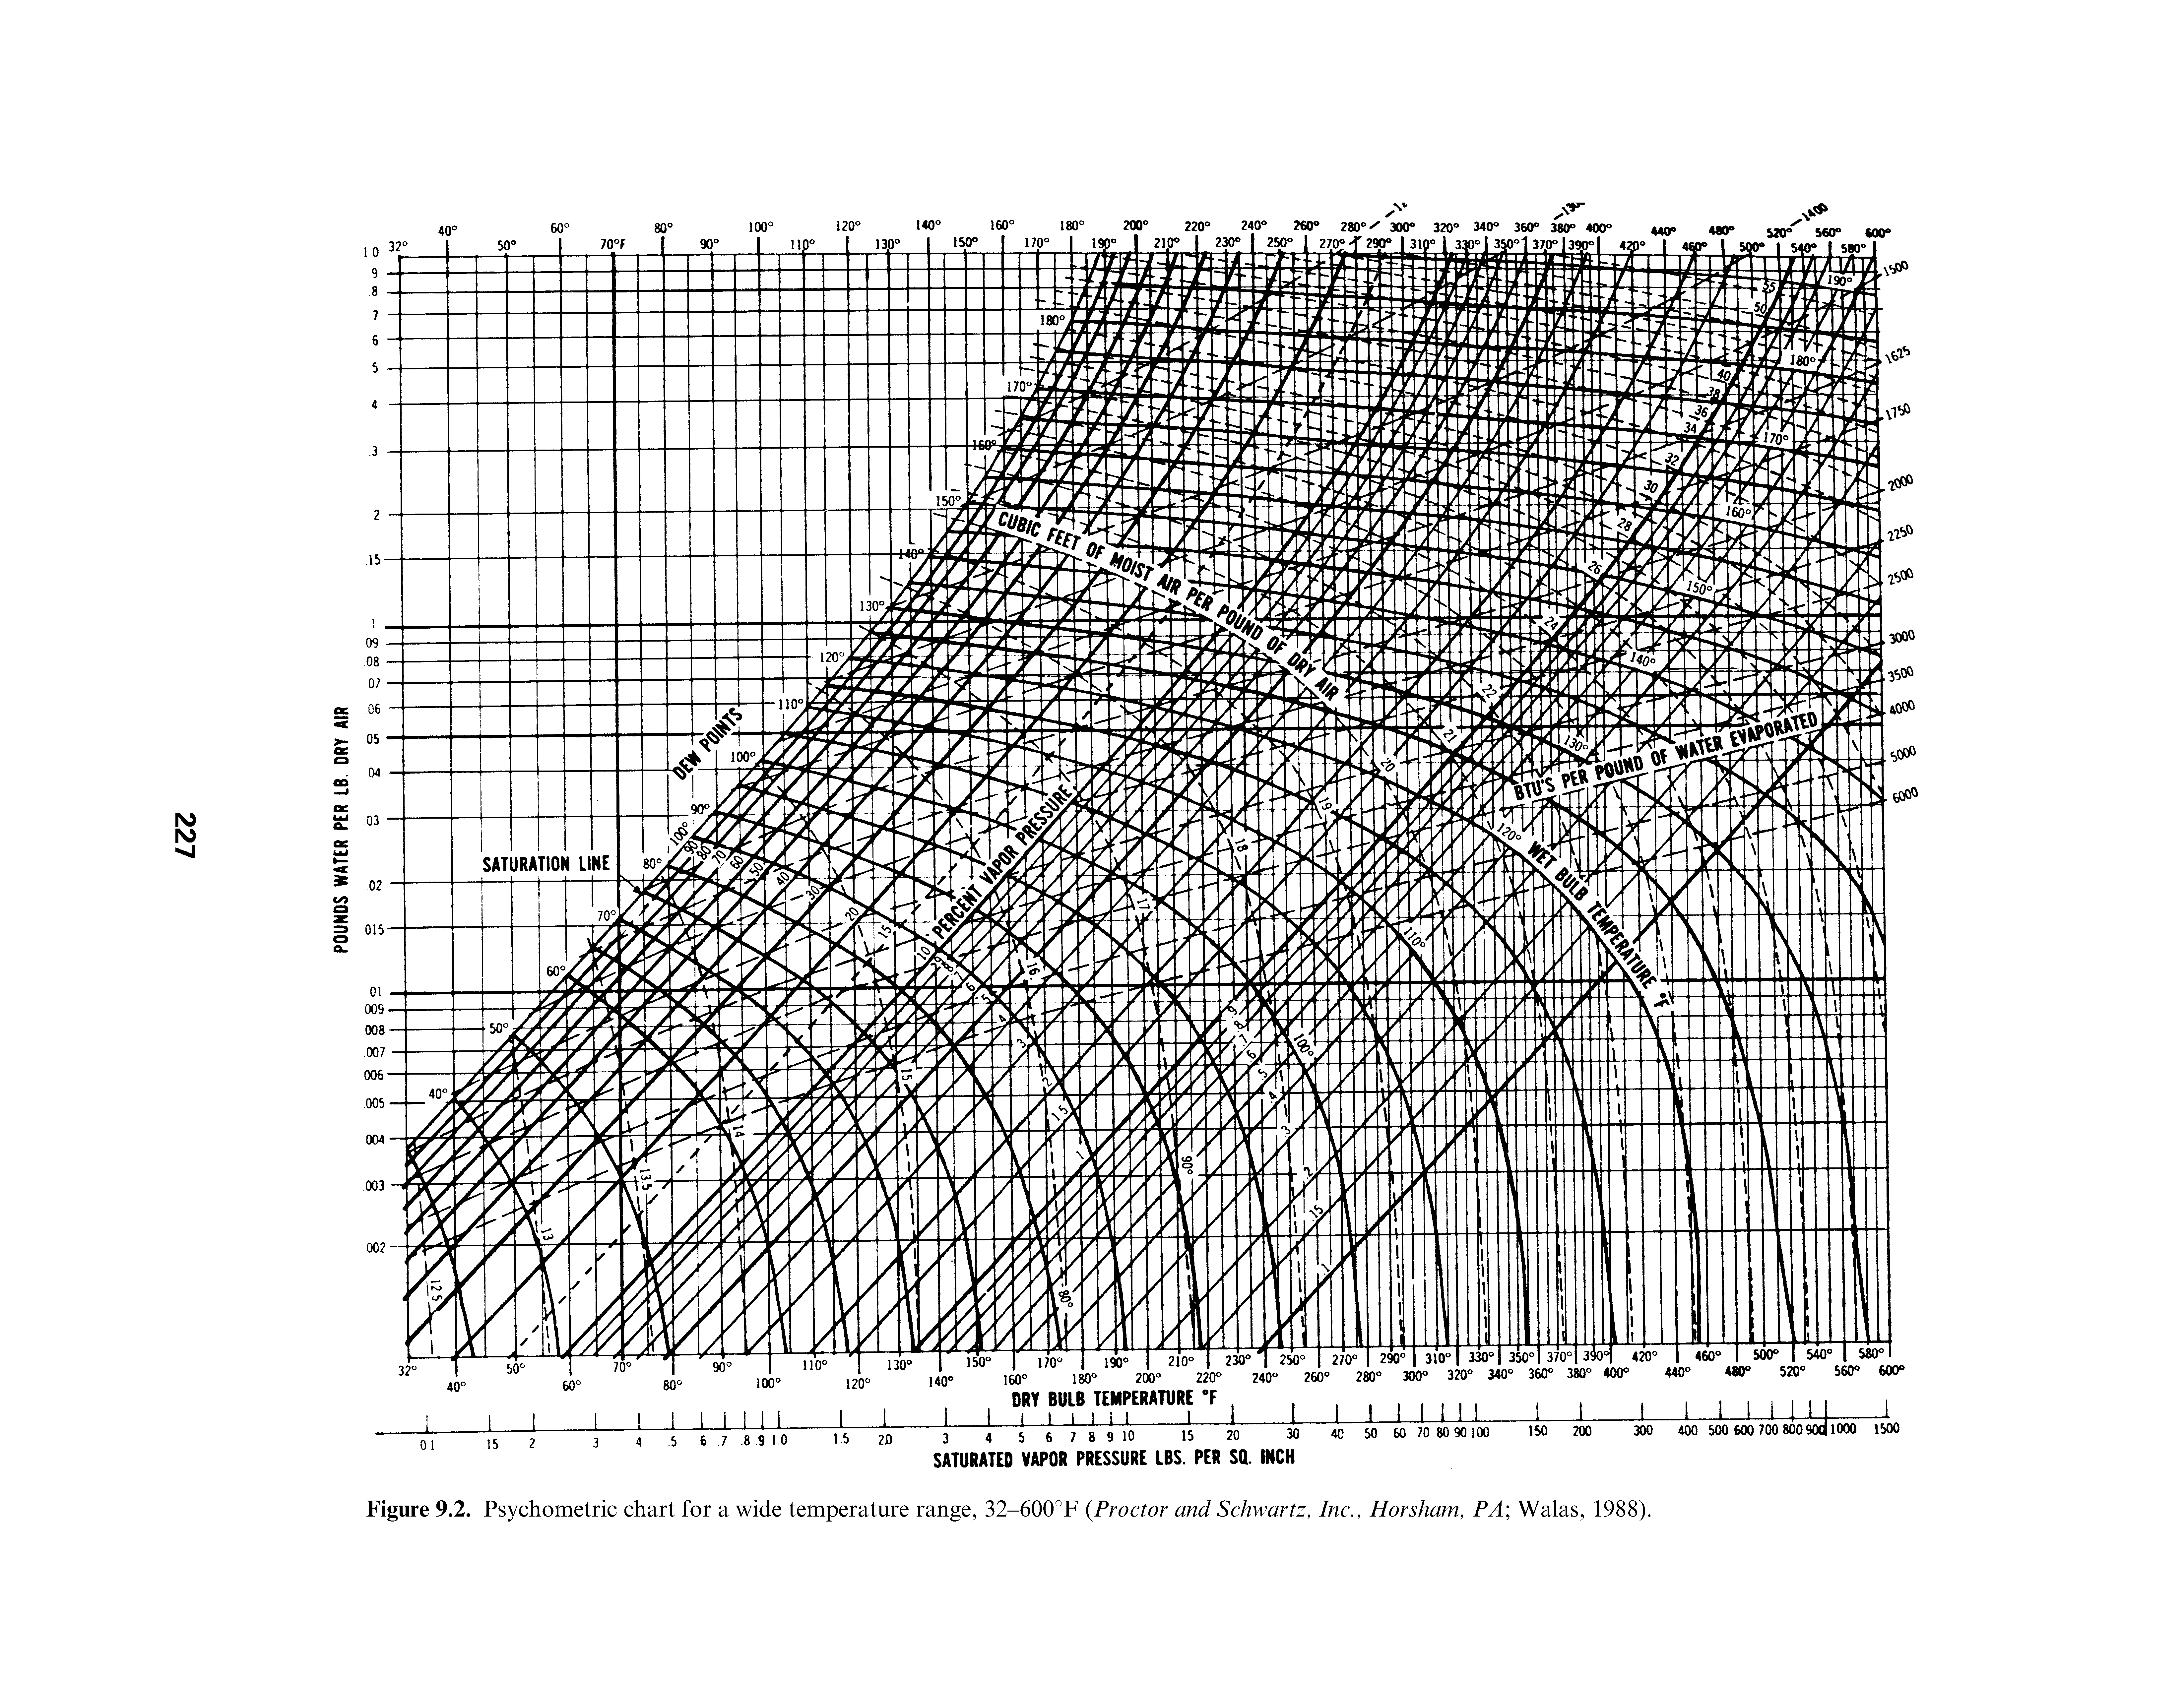 Figure 9.2. Psychometric chart for a wide temperature range, 32-600°F Proctor and Schwartz, Inc., Horsham, PA Walas, 1988).